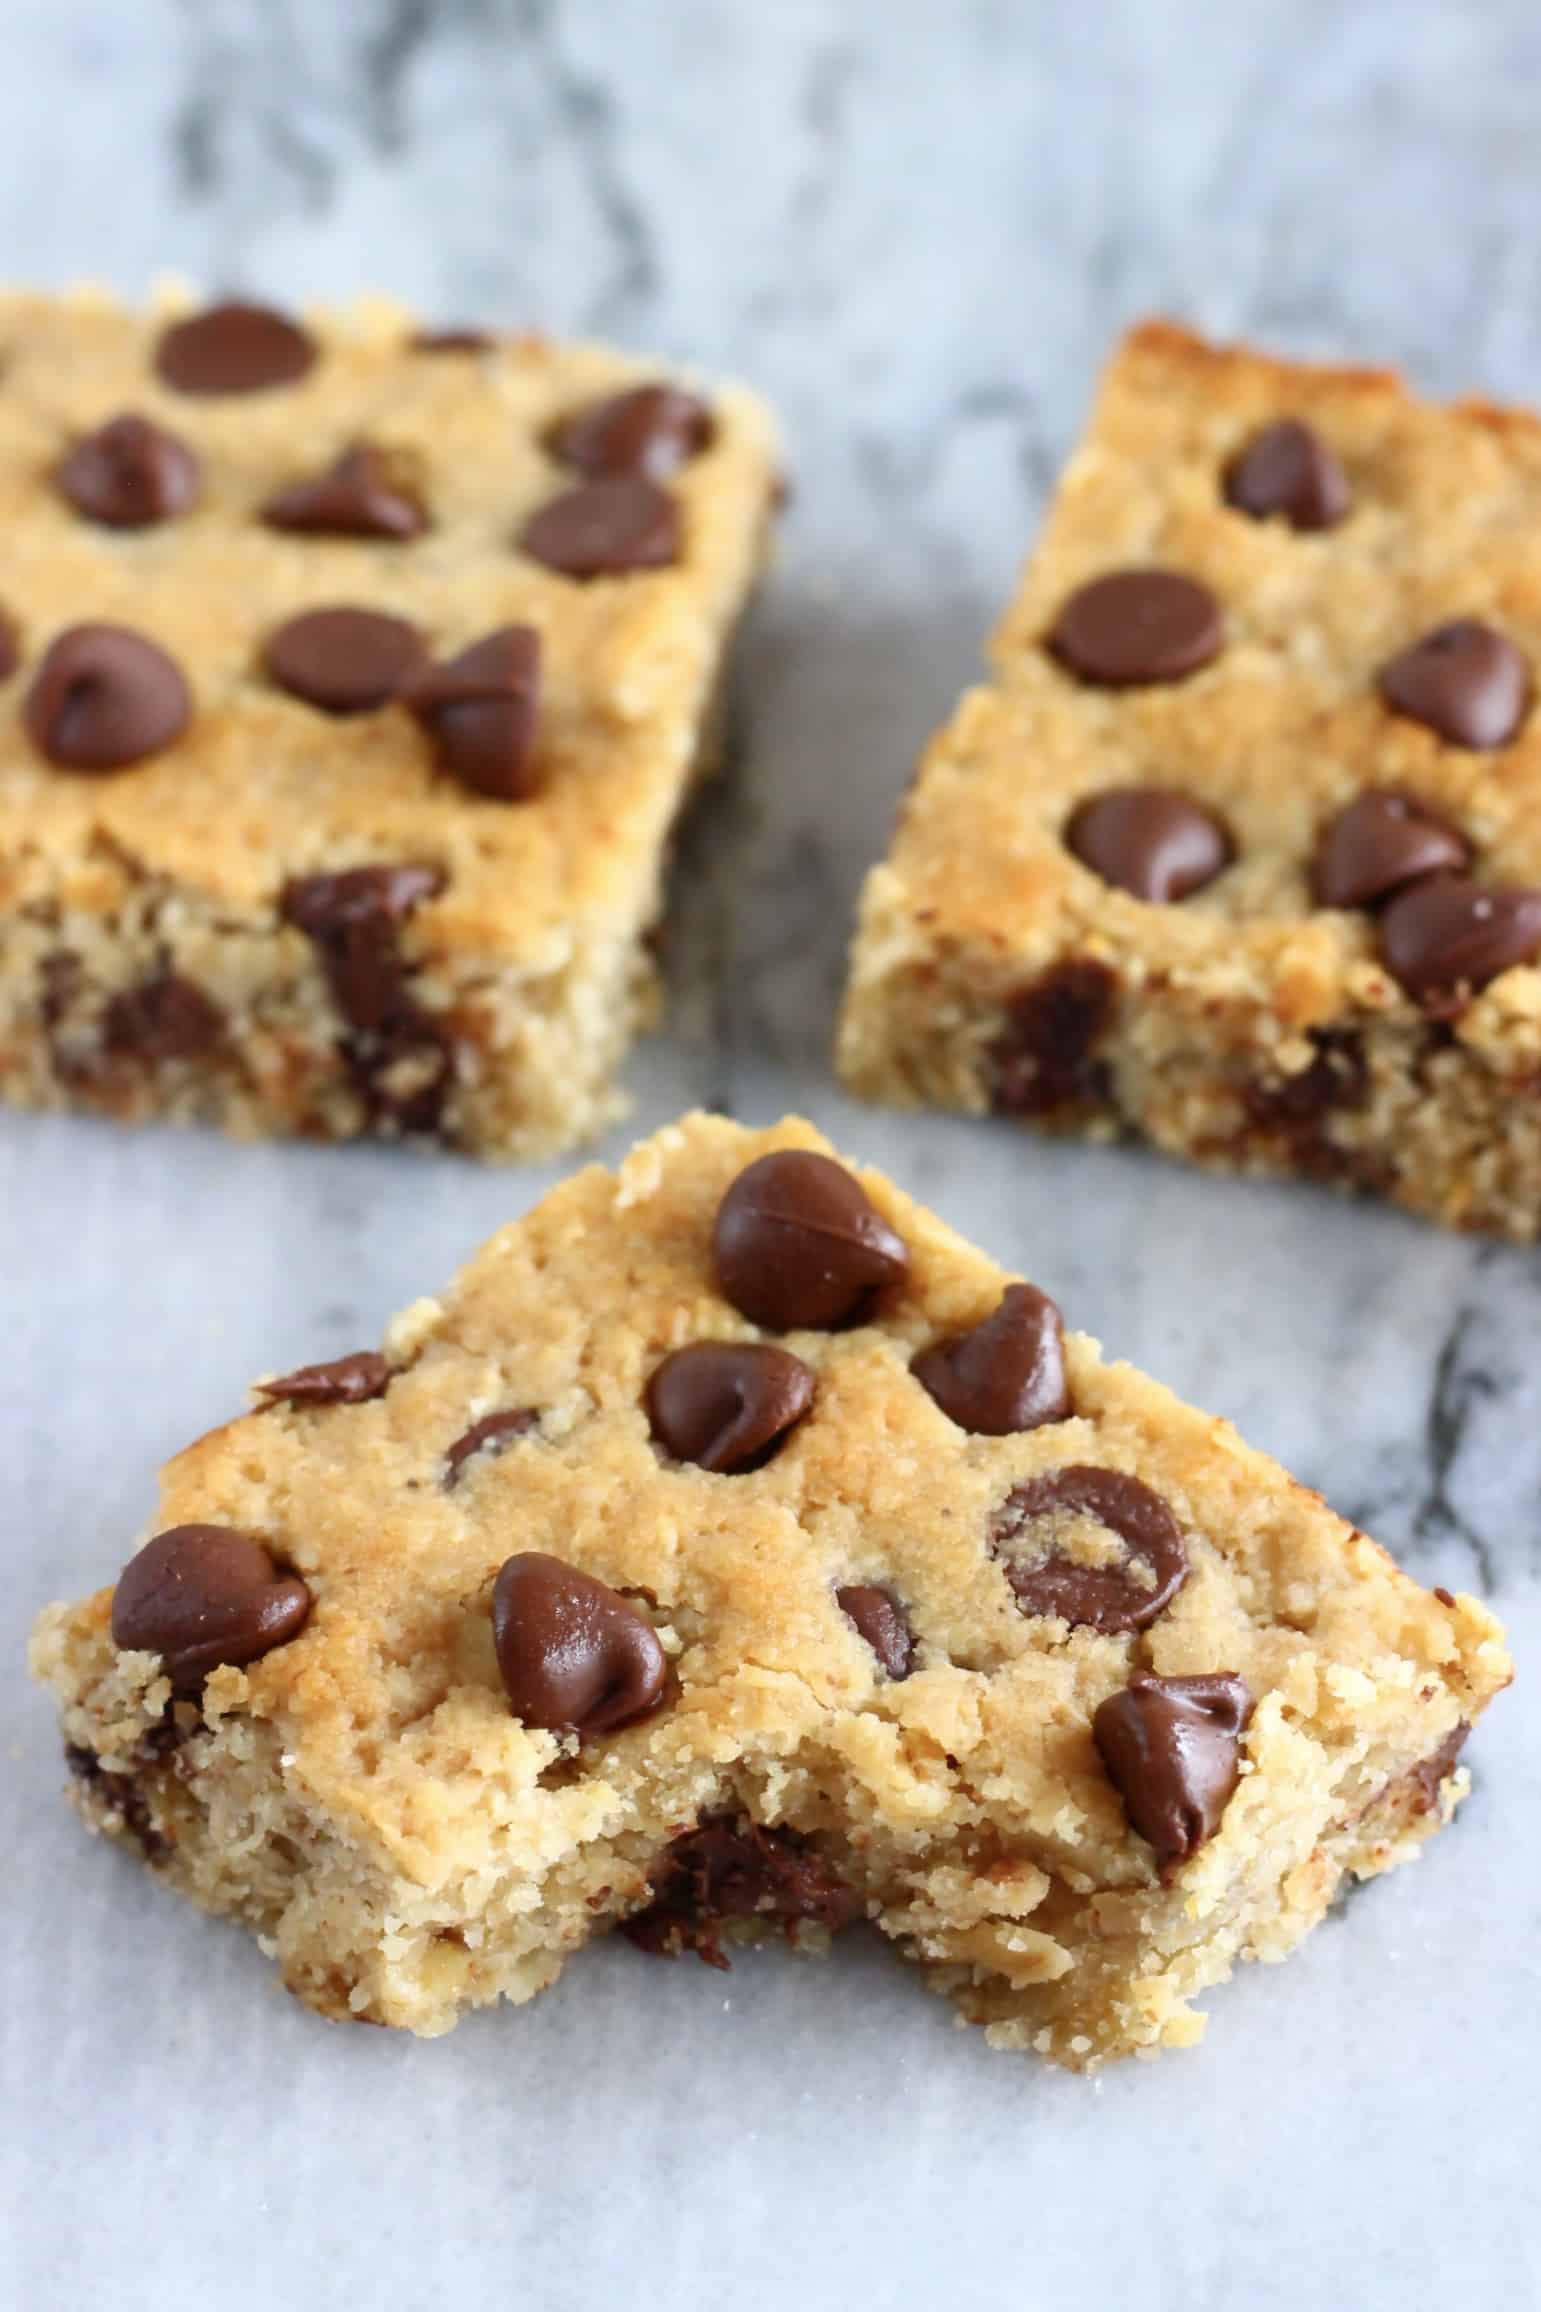 Three gluten-free vegan oatmeal chocolate chip cookie bars with a bite taken out of one